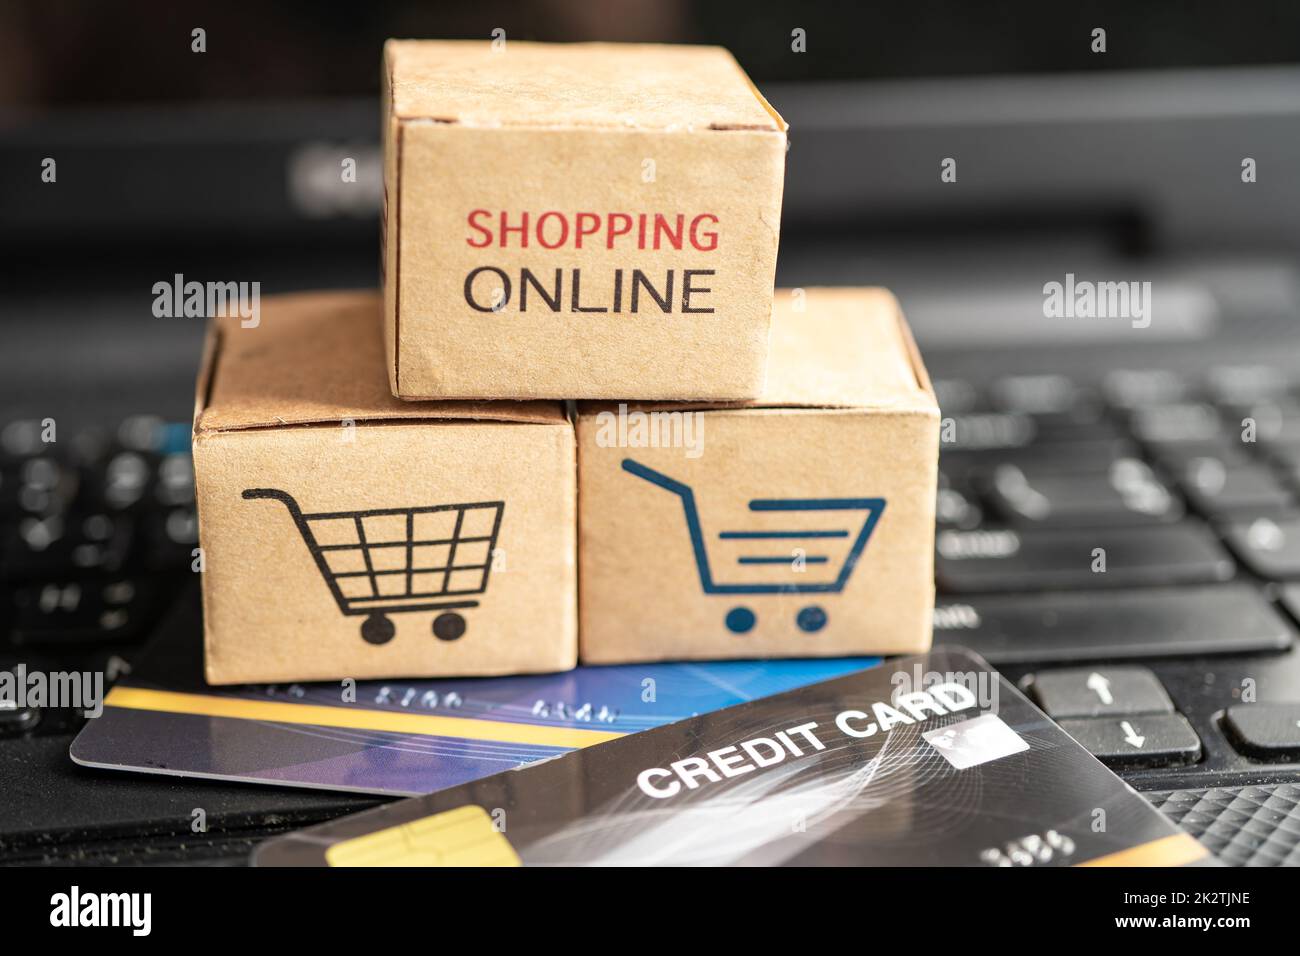 Shopping online box with credit card on laptop computer. Finance commerce import export business concept. Stock Photo